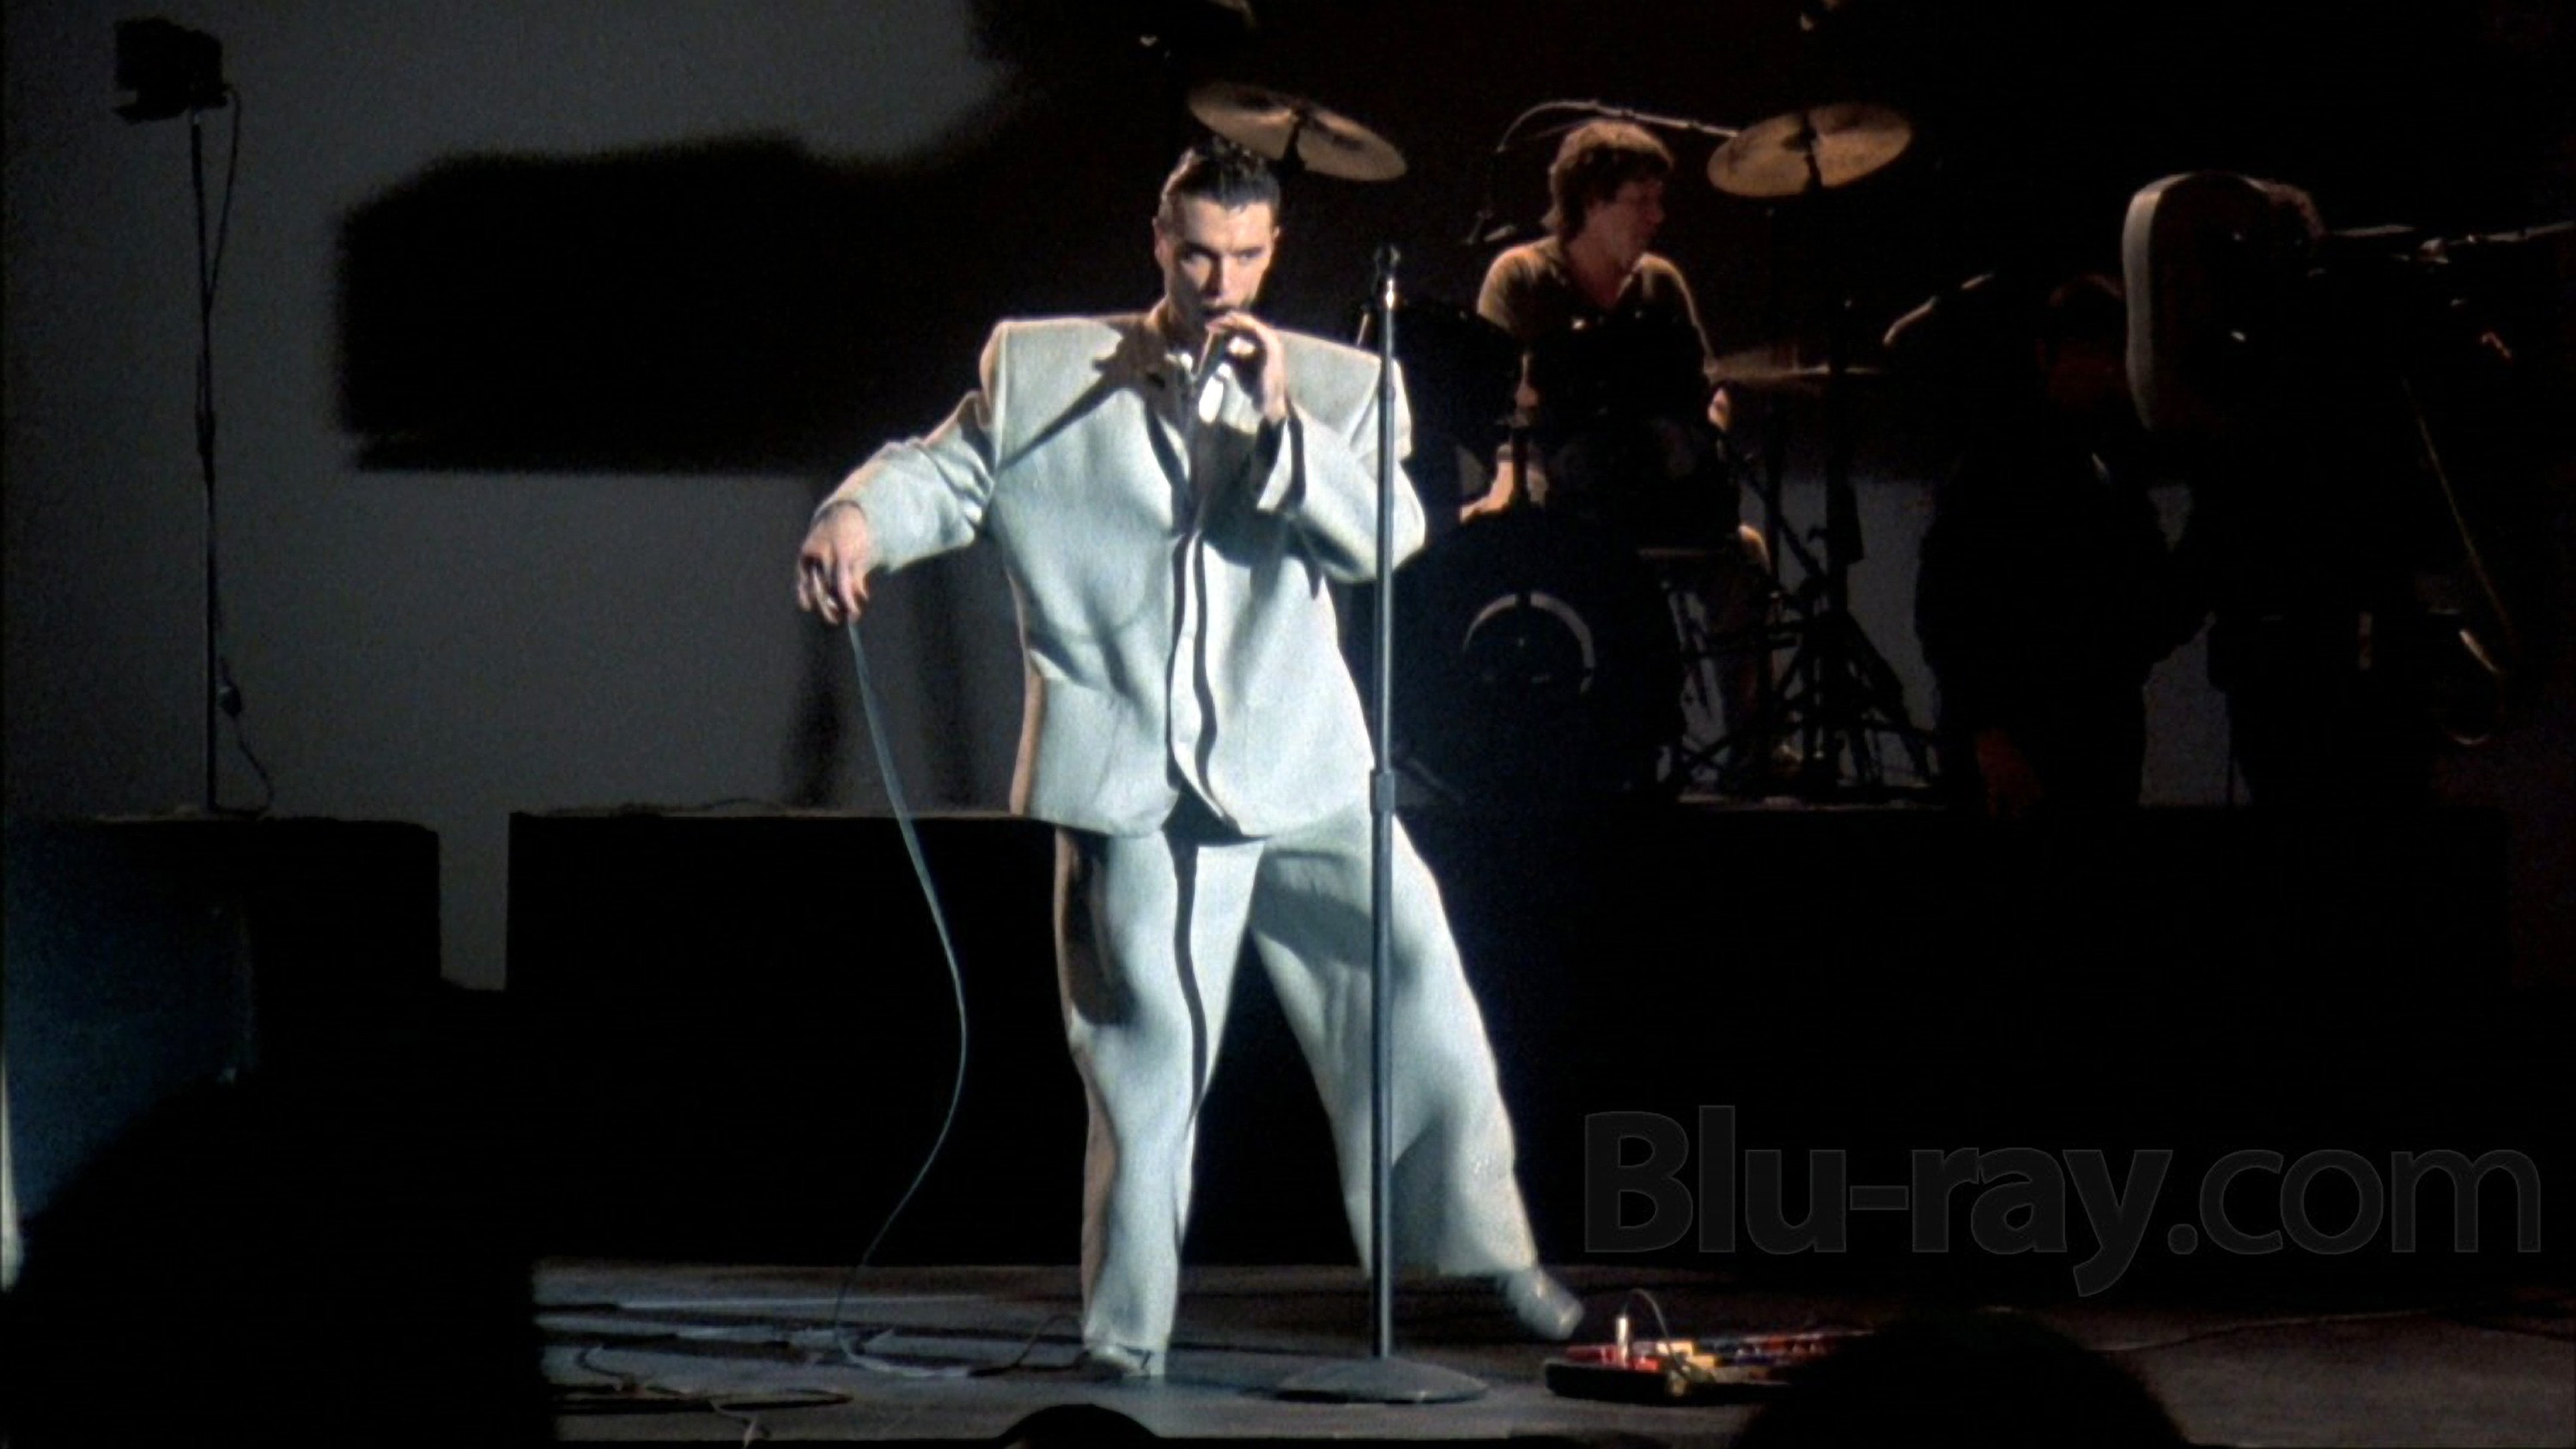 stop making sense once in a lifetime